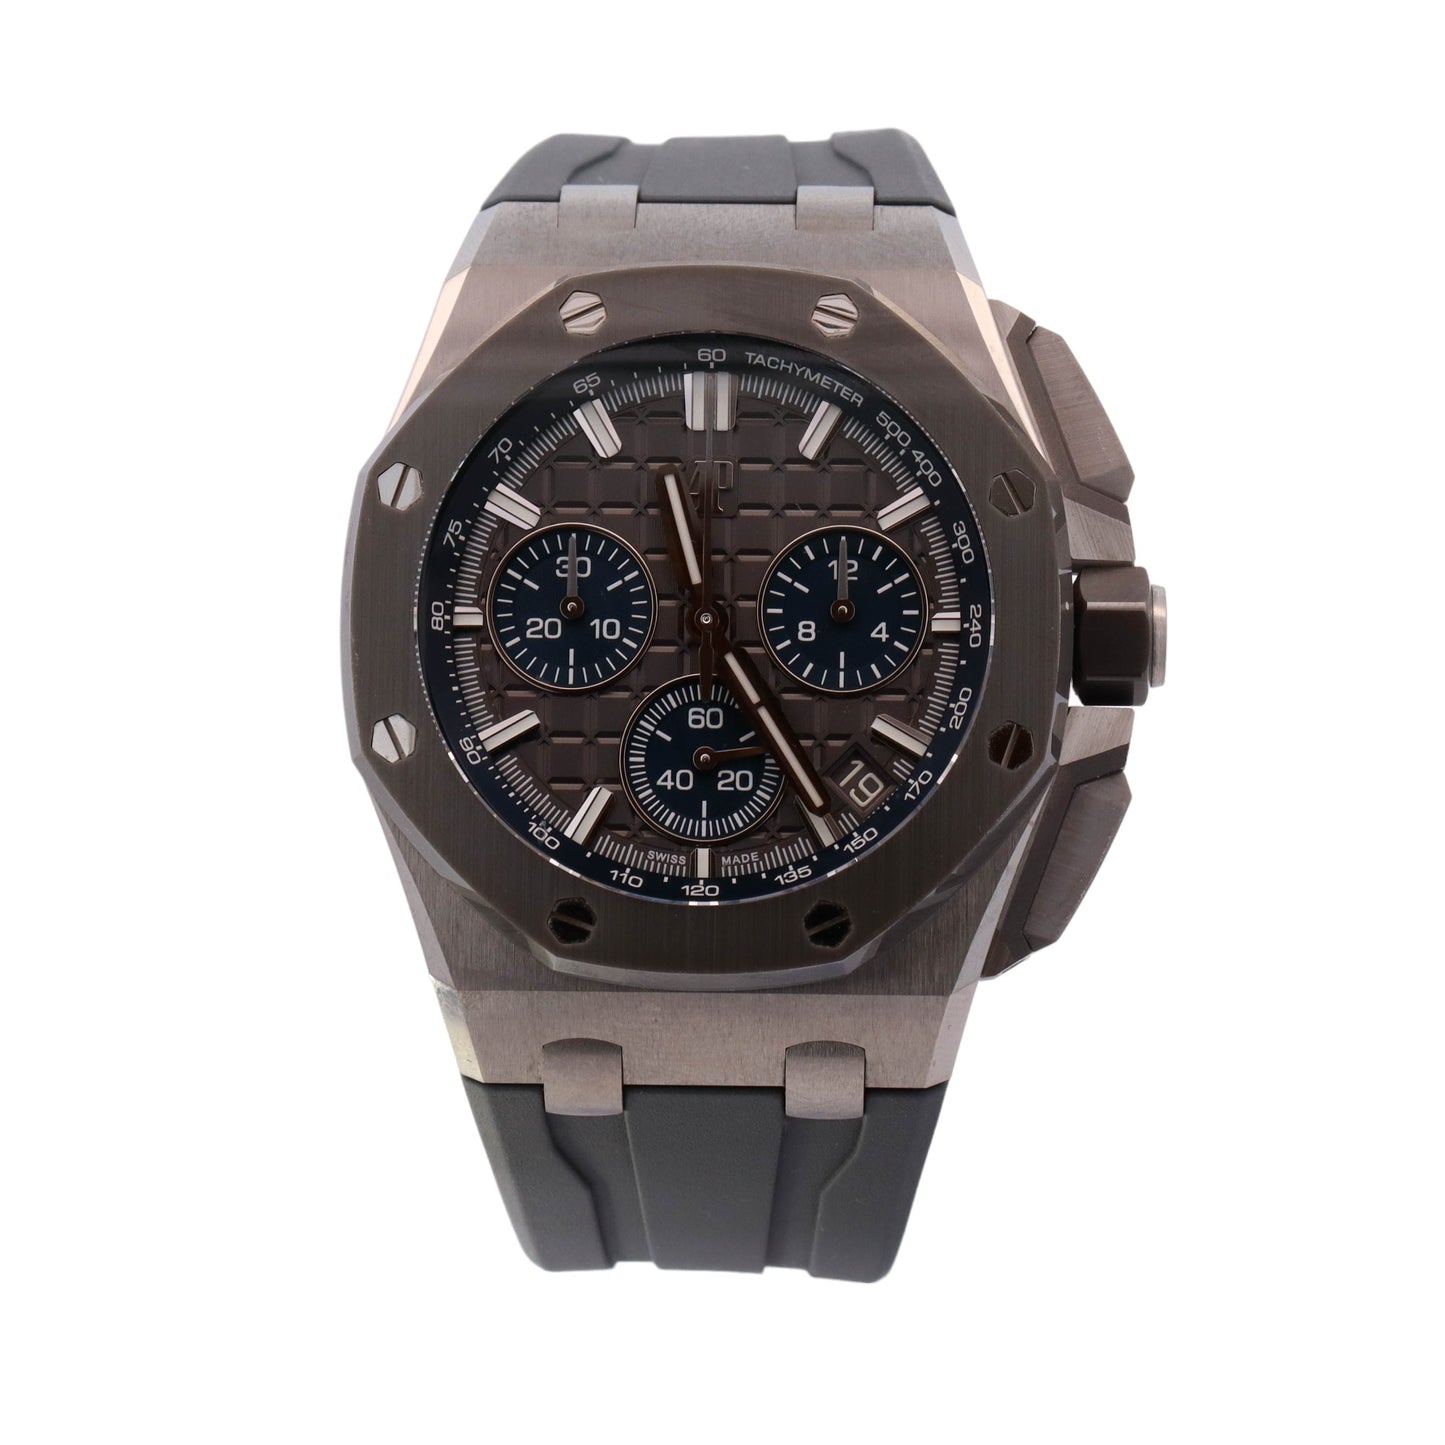 Audemars Piguet Royal Oak Offshore Stainless Steel 43mm Grey Chronograph Dial Watch Reference# 26420IO.OO.A009CA.01 - Happy Jewelers Fine Jewelry Lifetime Warranty